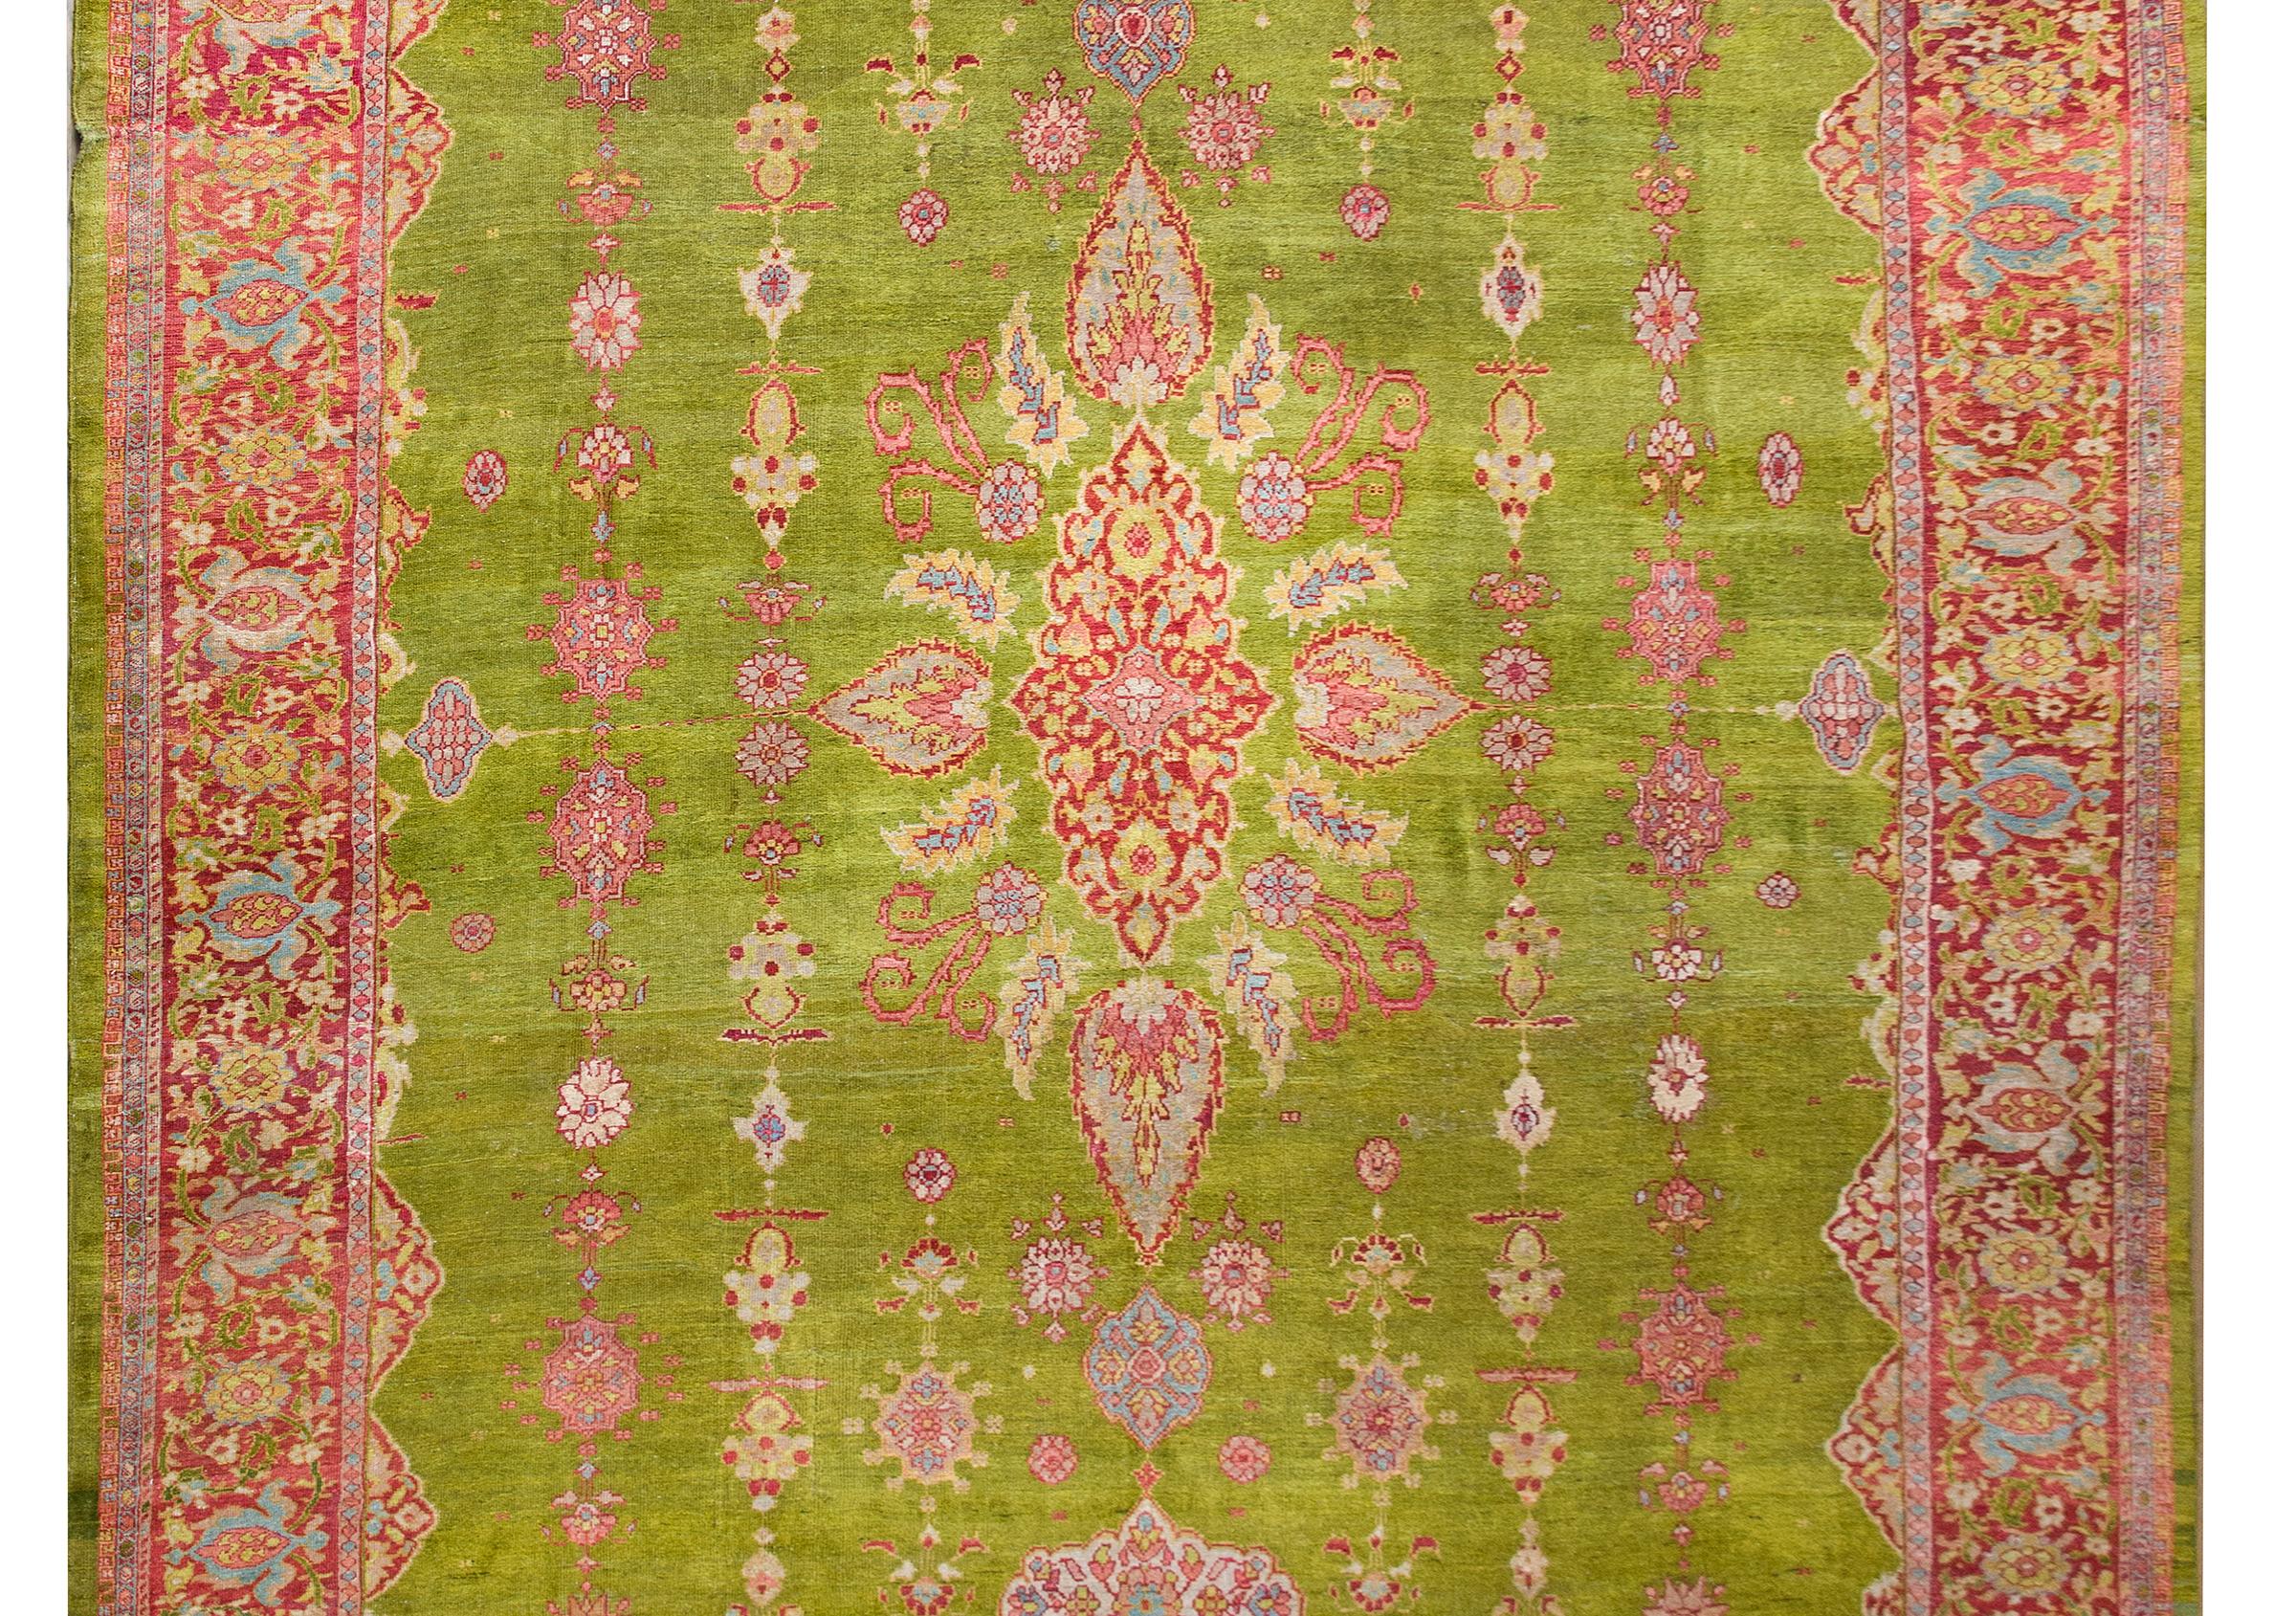 A stunning and rare late 19th century Persian Sultanabad rug with the most wonderful central floral medallion living amidst a field of more stylized flowers all woven in brilliant cranberry, light indigo, pink, and gold, and set against a rare